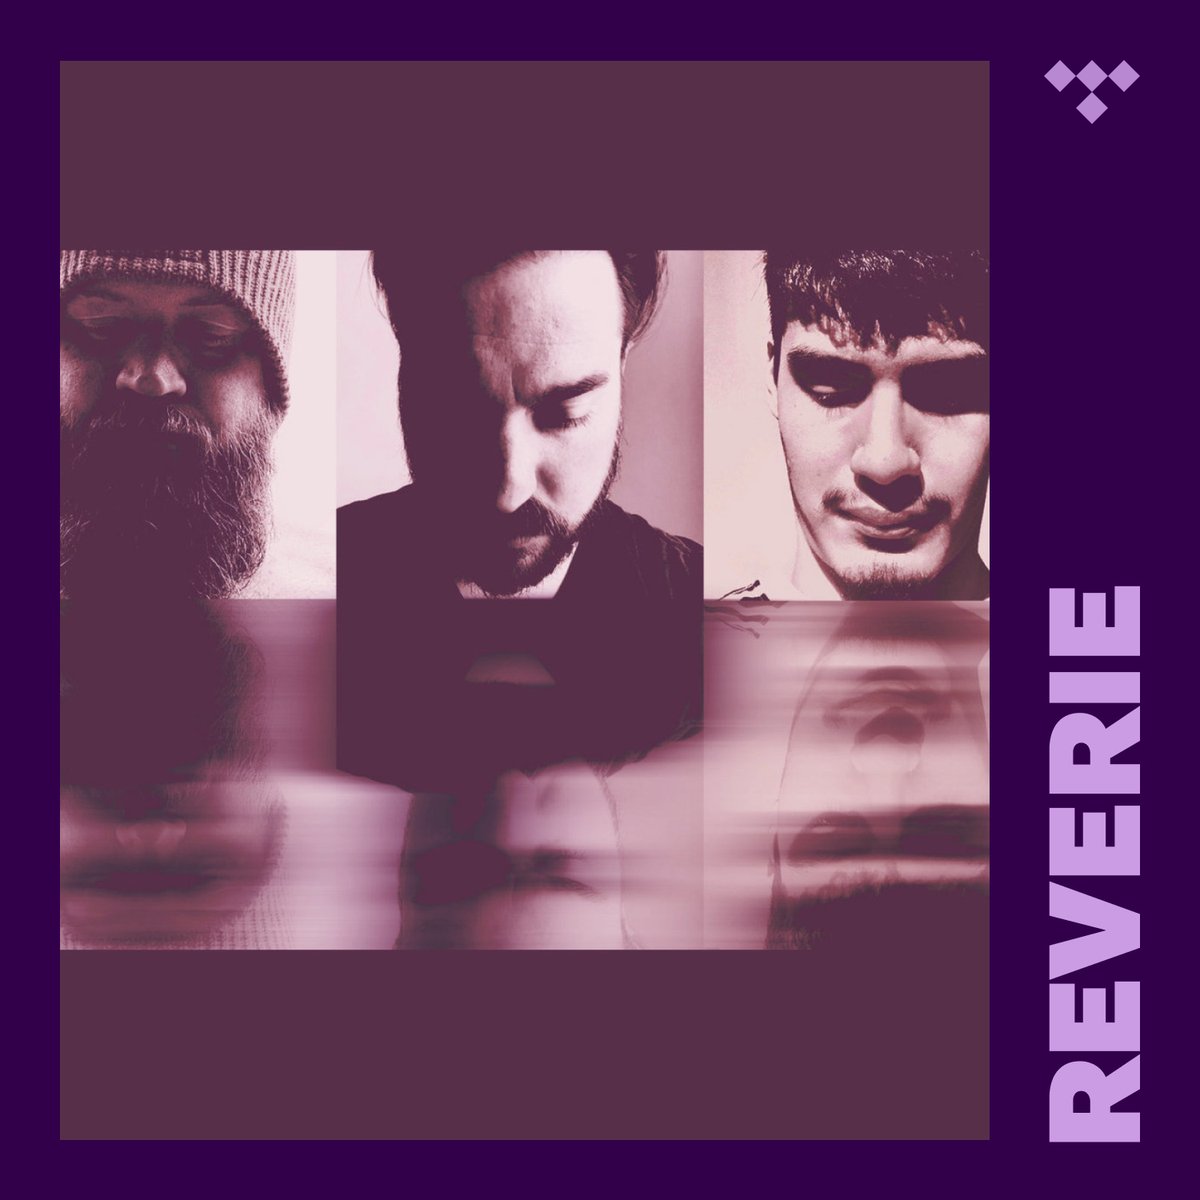 ON THE COVER! @TIDAL added @dcatisofficial to the cover of their 'Reverie' playlist 🤩 You can listen here 👉 listen.tidal.com/playlist/62eb0…